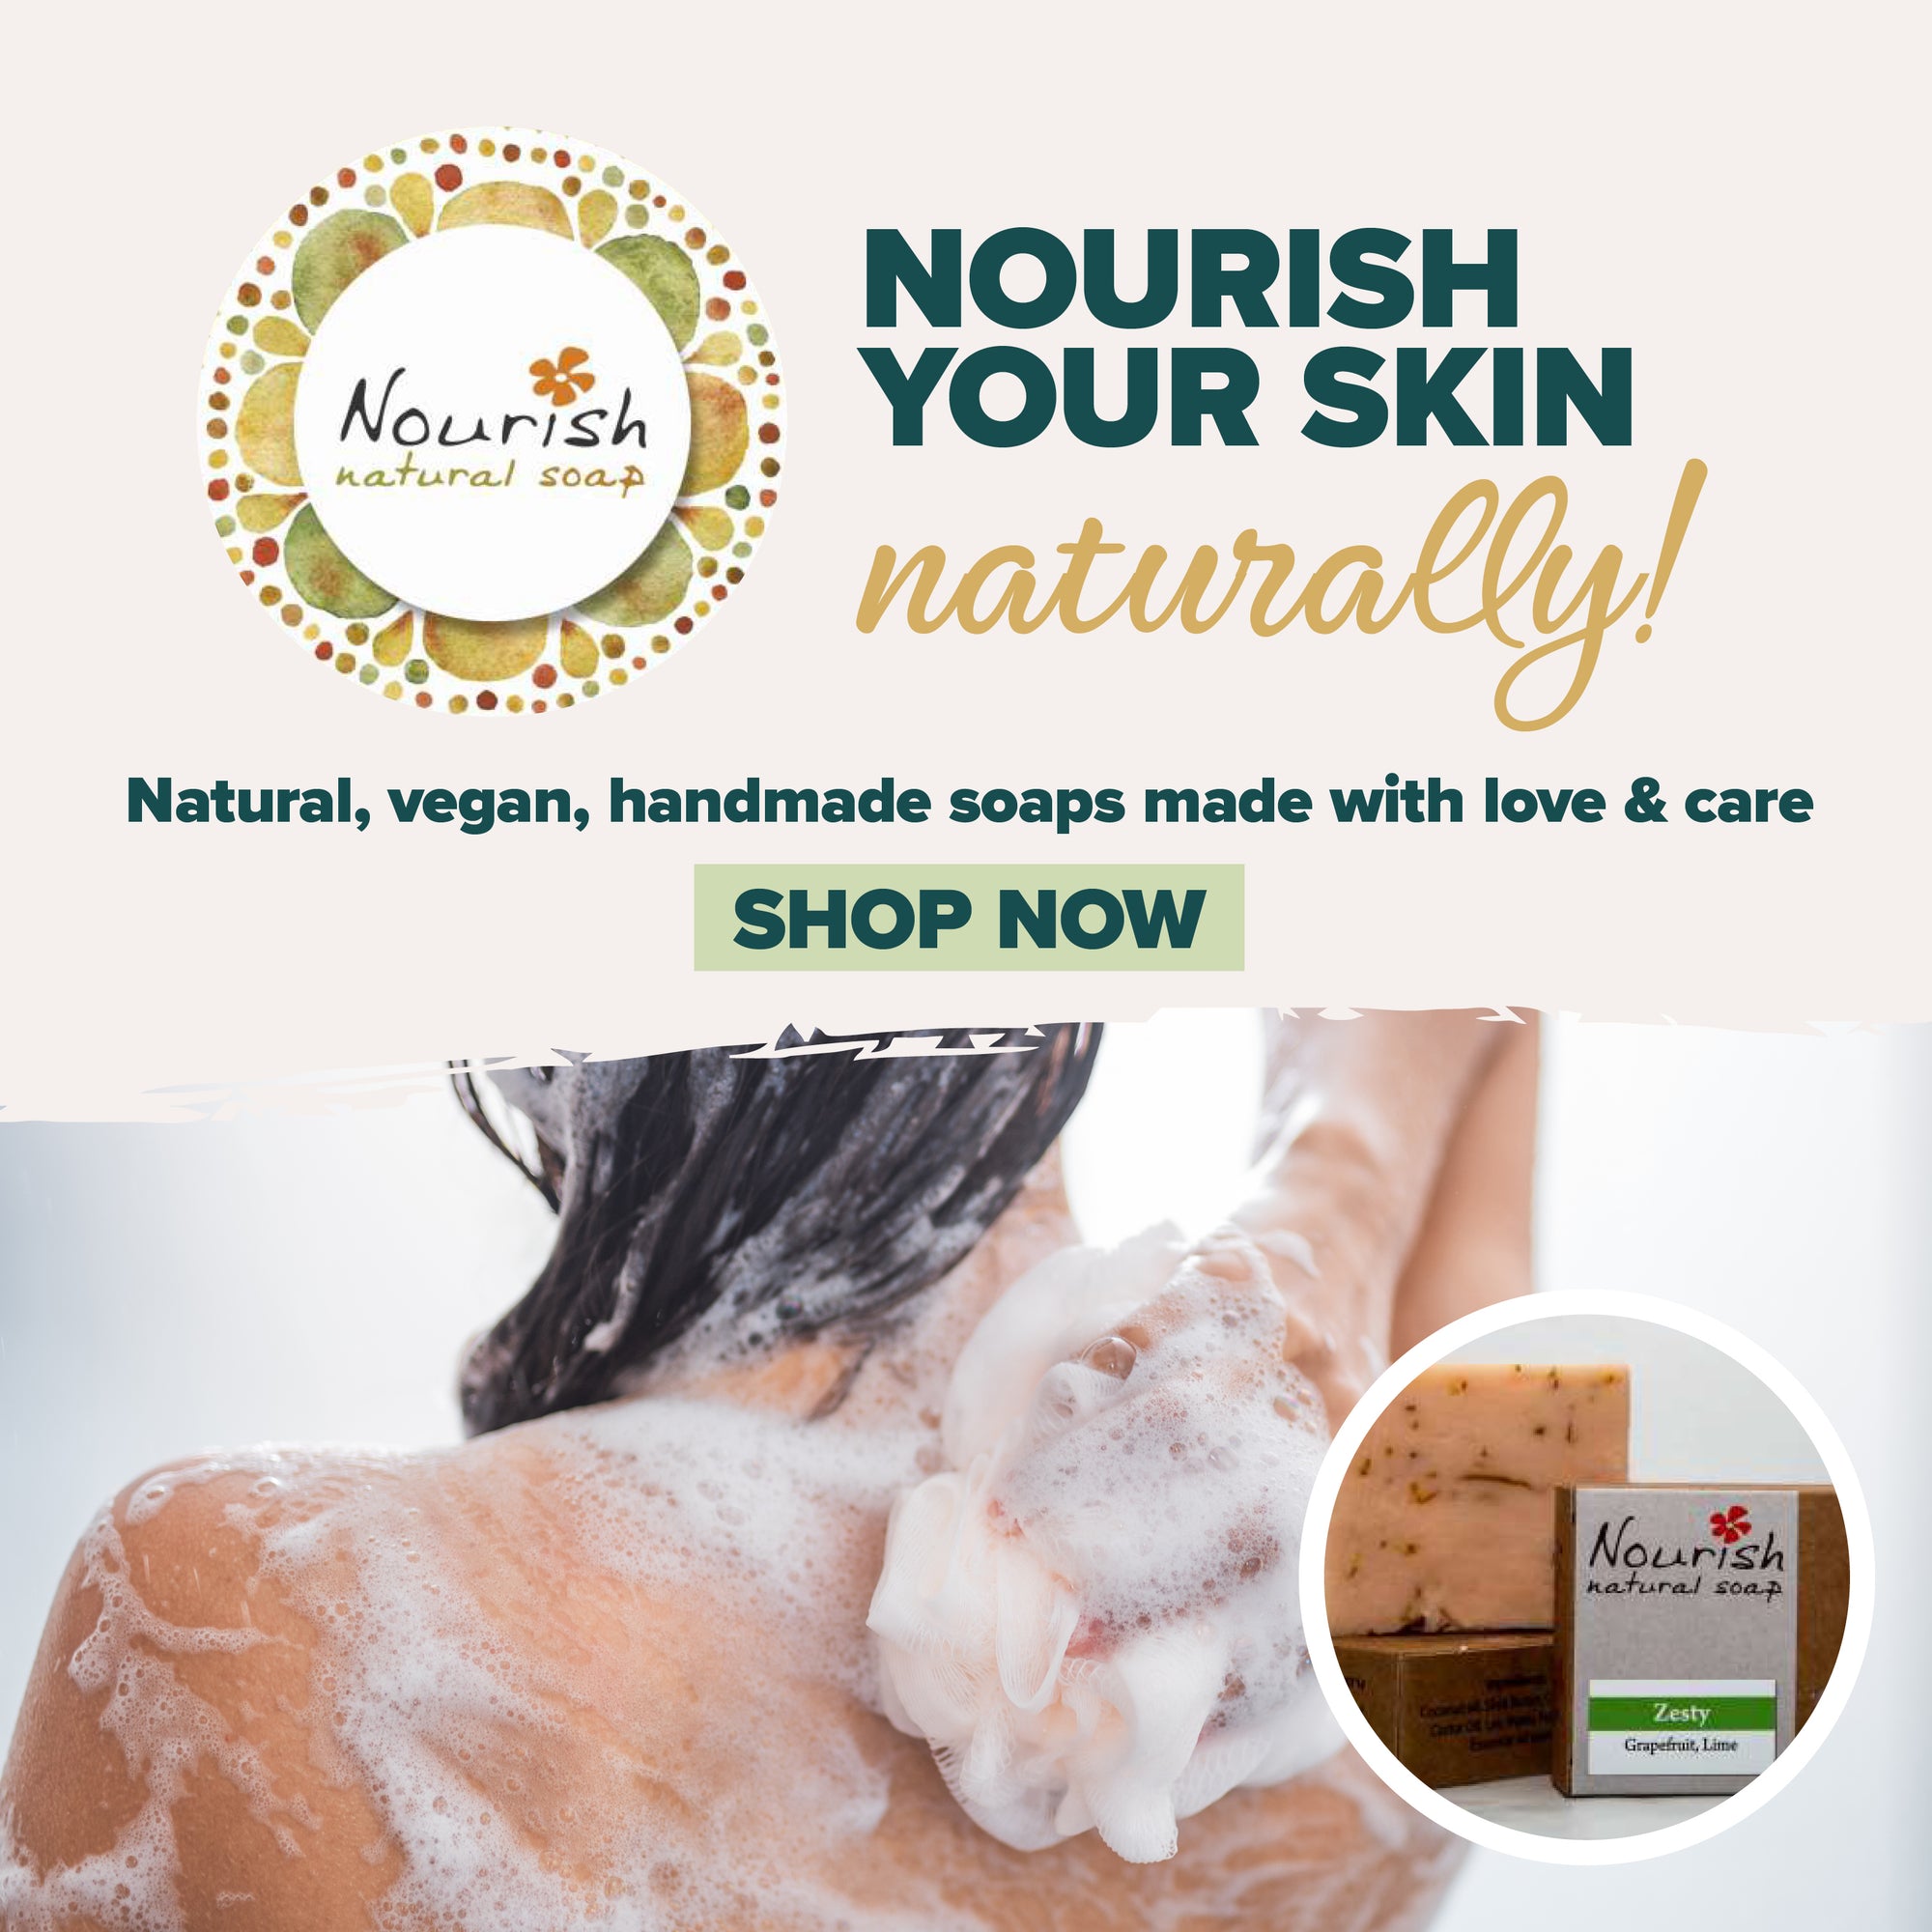 Natural soap gentle on your skin